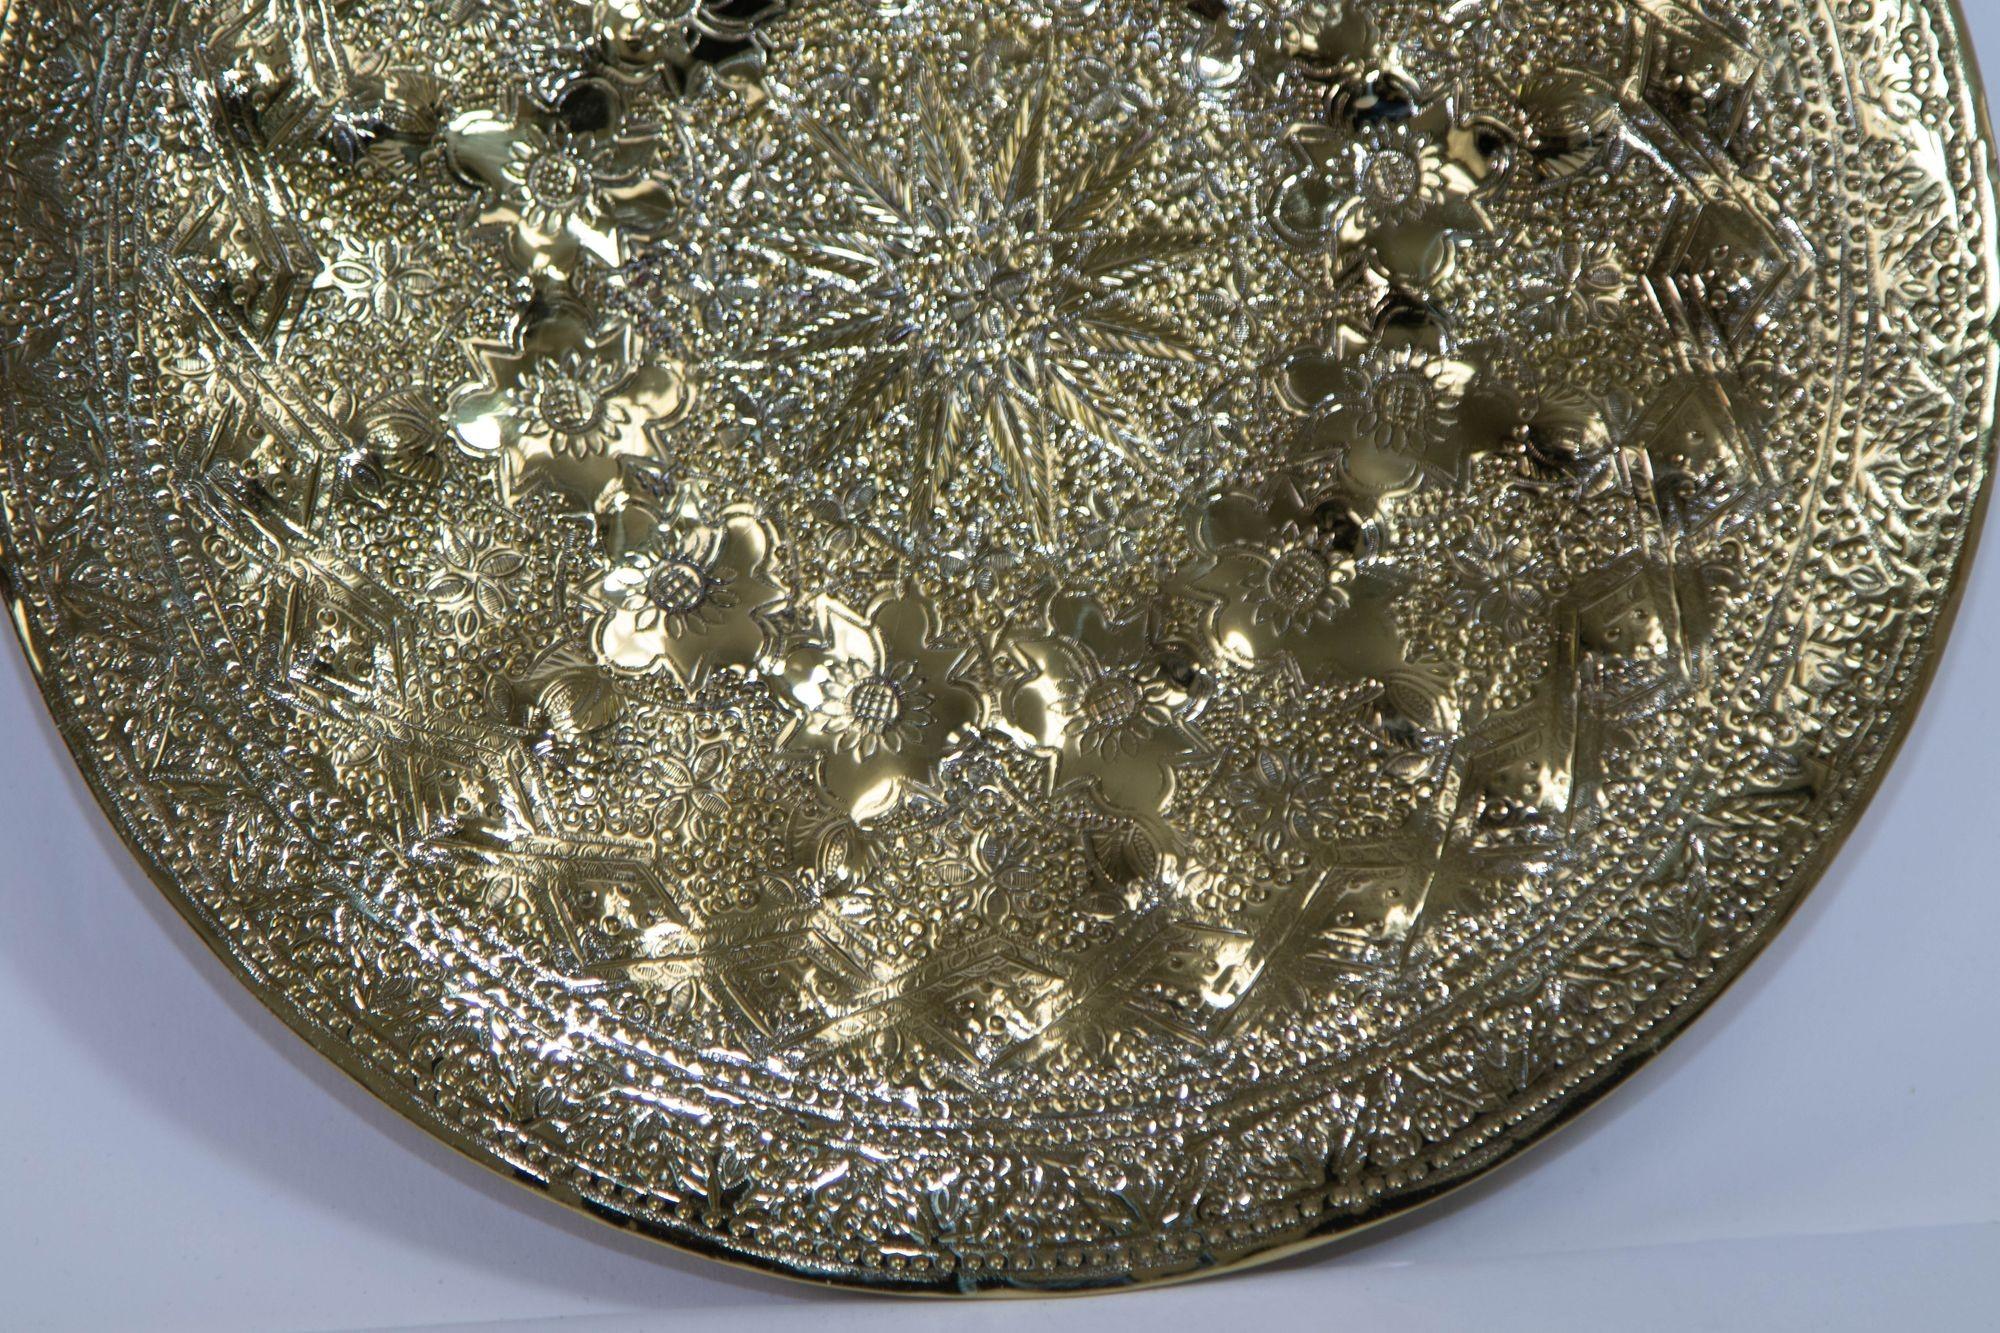 20th Century Islamic Persian Polished Brass Tray Collectible Metal Work Platter 10 inches D. For Sale